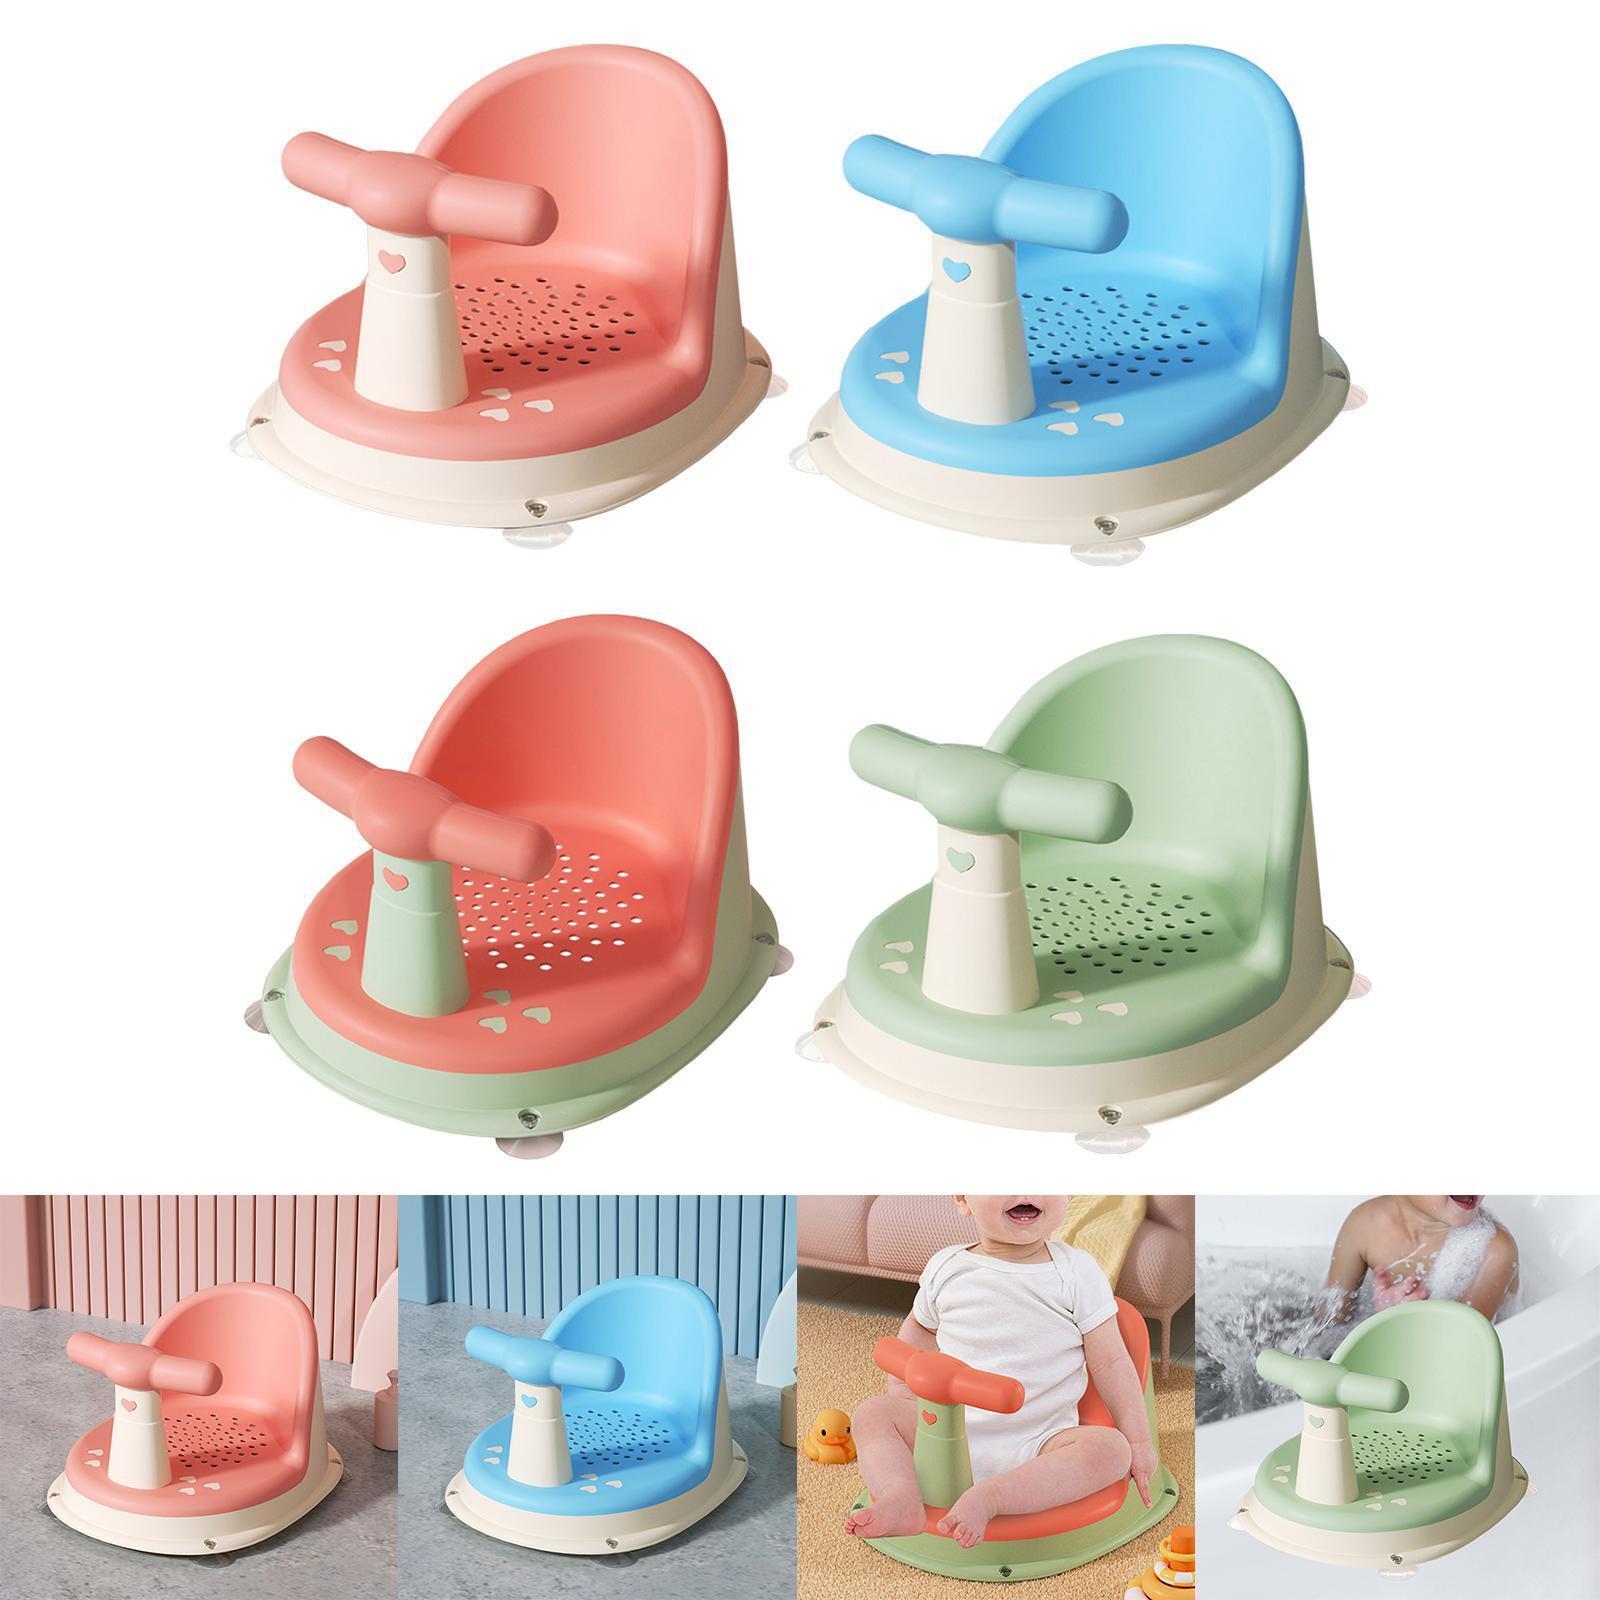 Bath Seat Chair Bathtub Seat Comfortable For Toddlers Kids